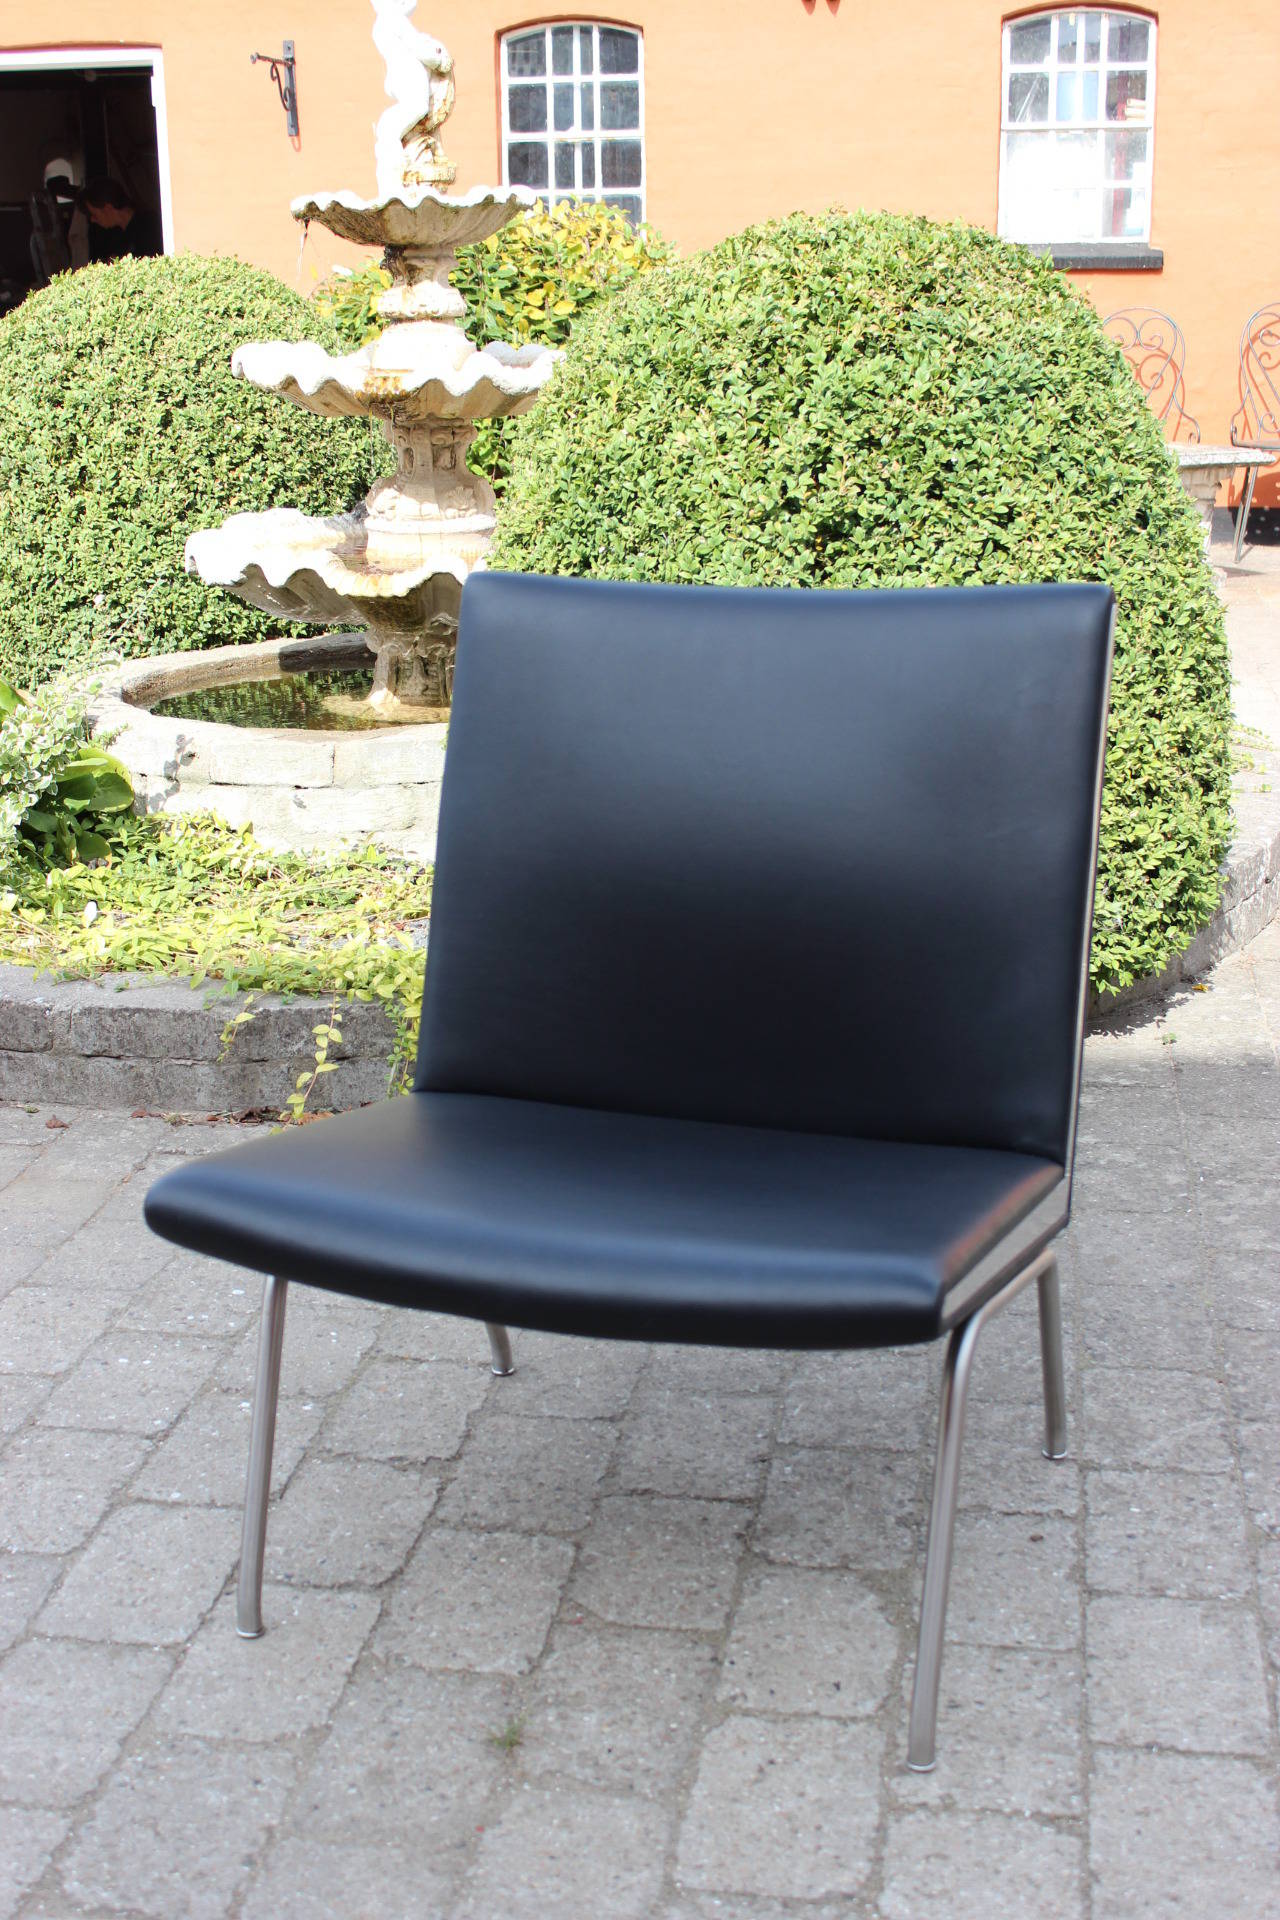 Airport chair, model AP 40, in black leather with stainless steel legs and side. The chair was designed in 1958 by Hans J. Wegner and manufactured by AP Stolen in the 1980s.